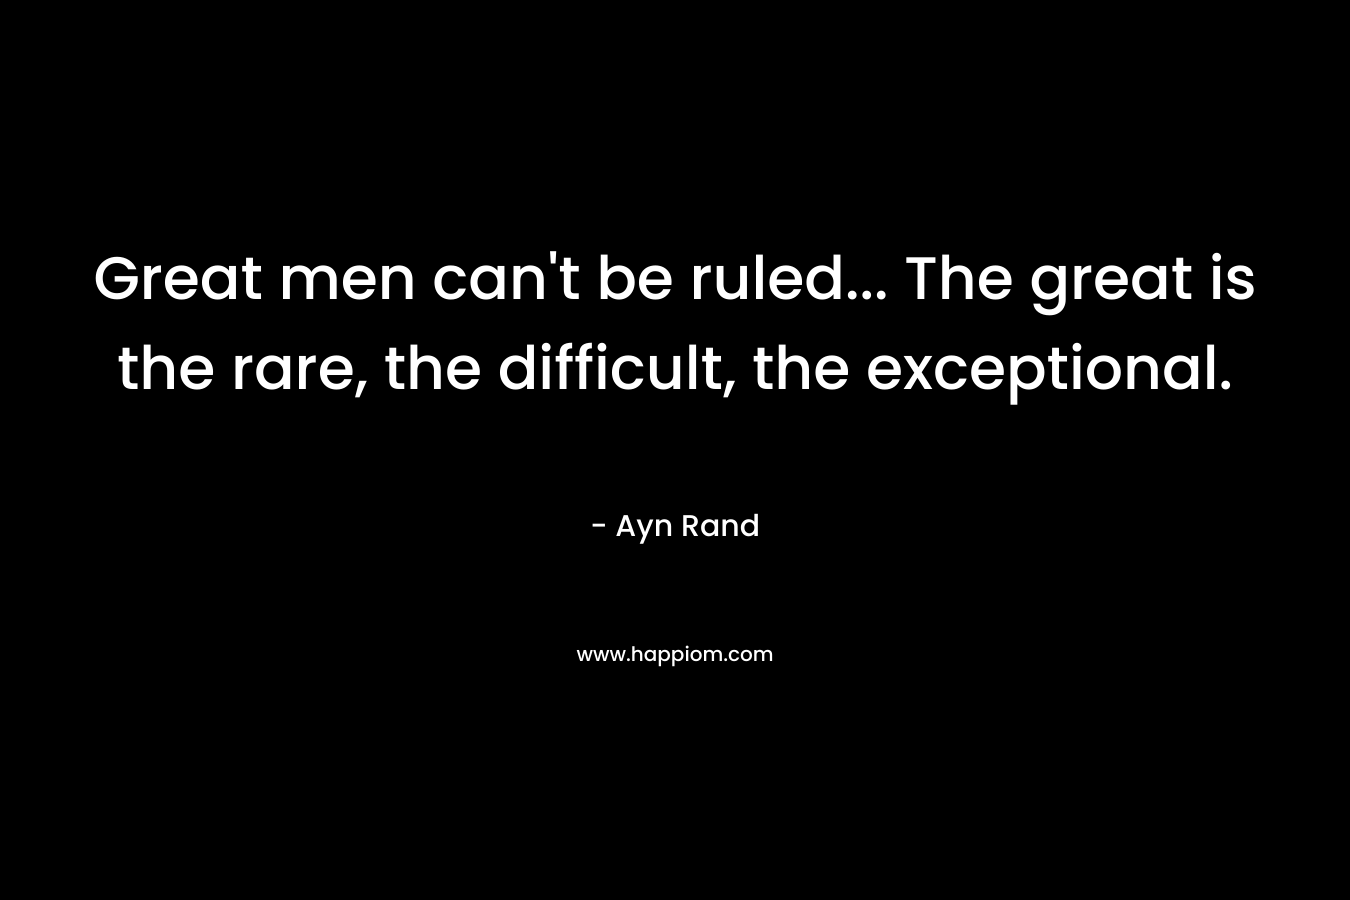 Great men can't be ruled... The great is the rare, the difficult, the exceptional.